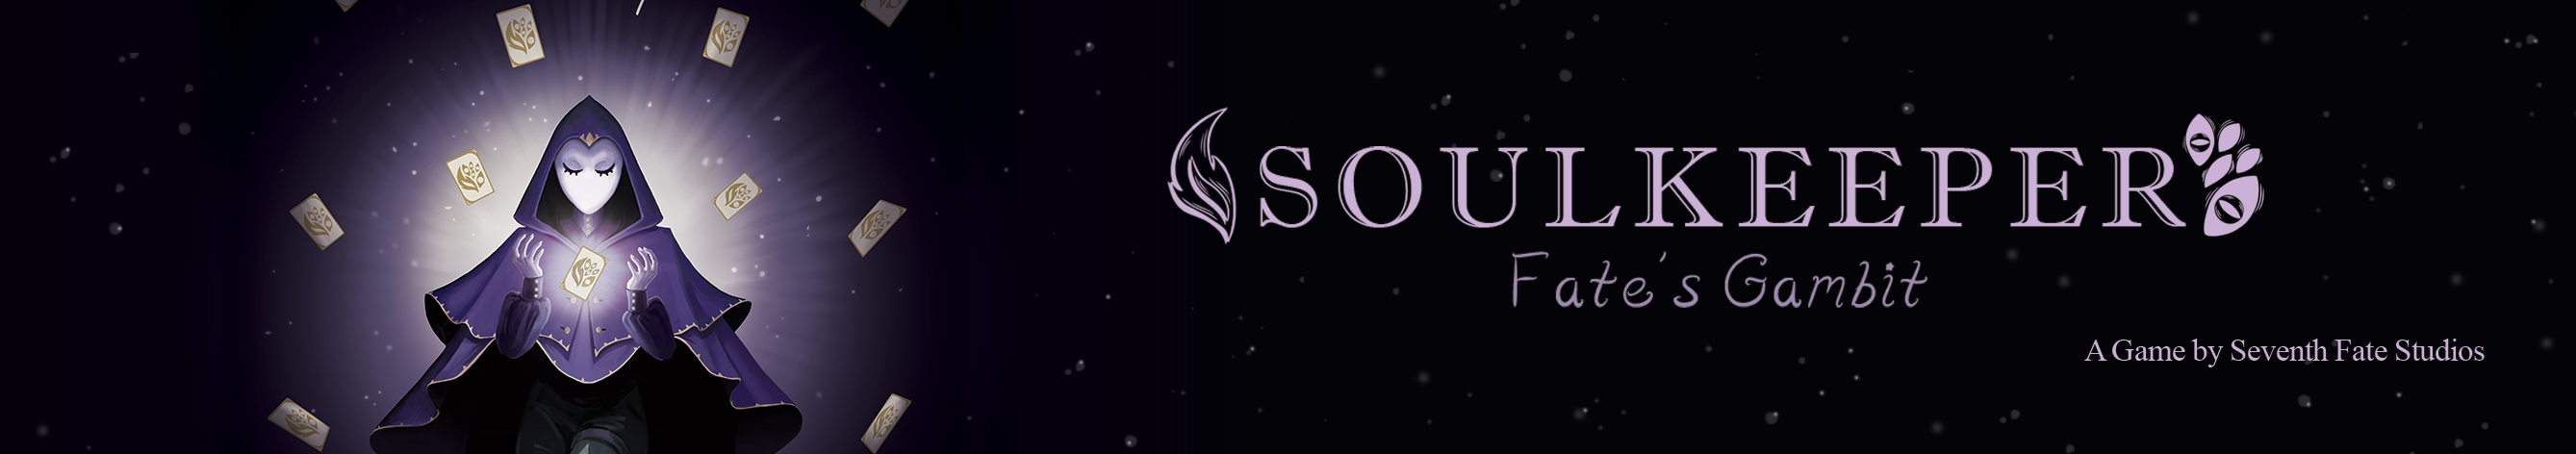 Soulkeeper: Fate's Gambit